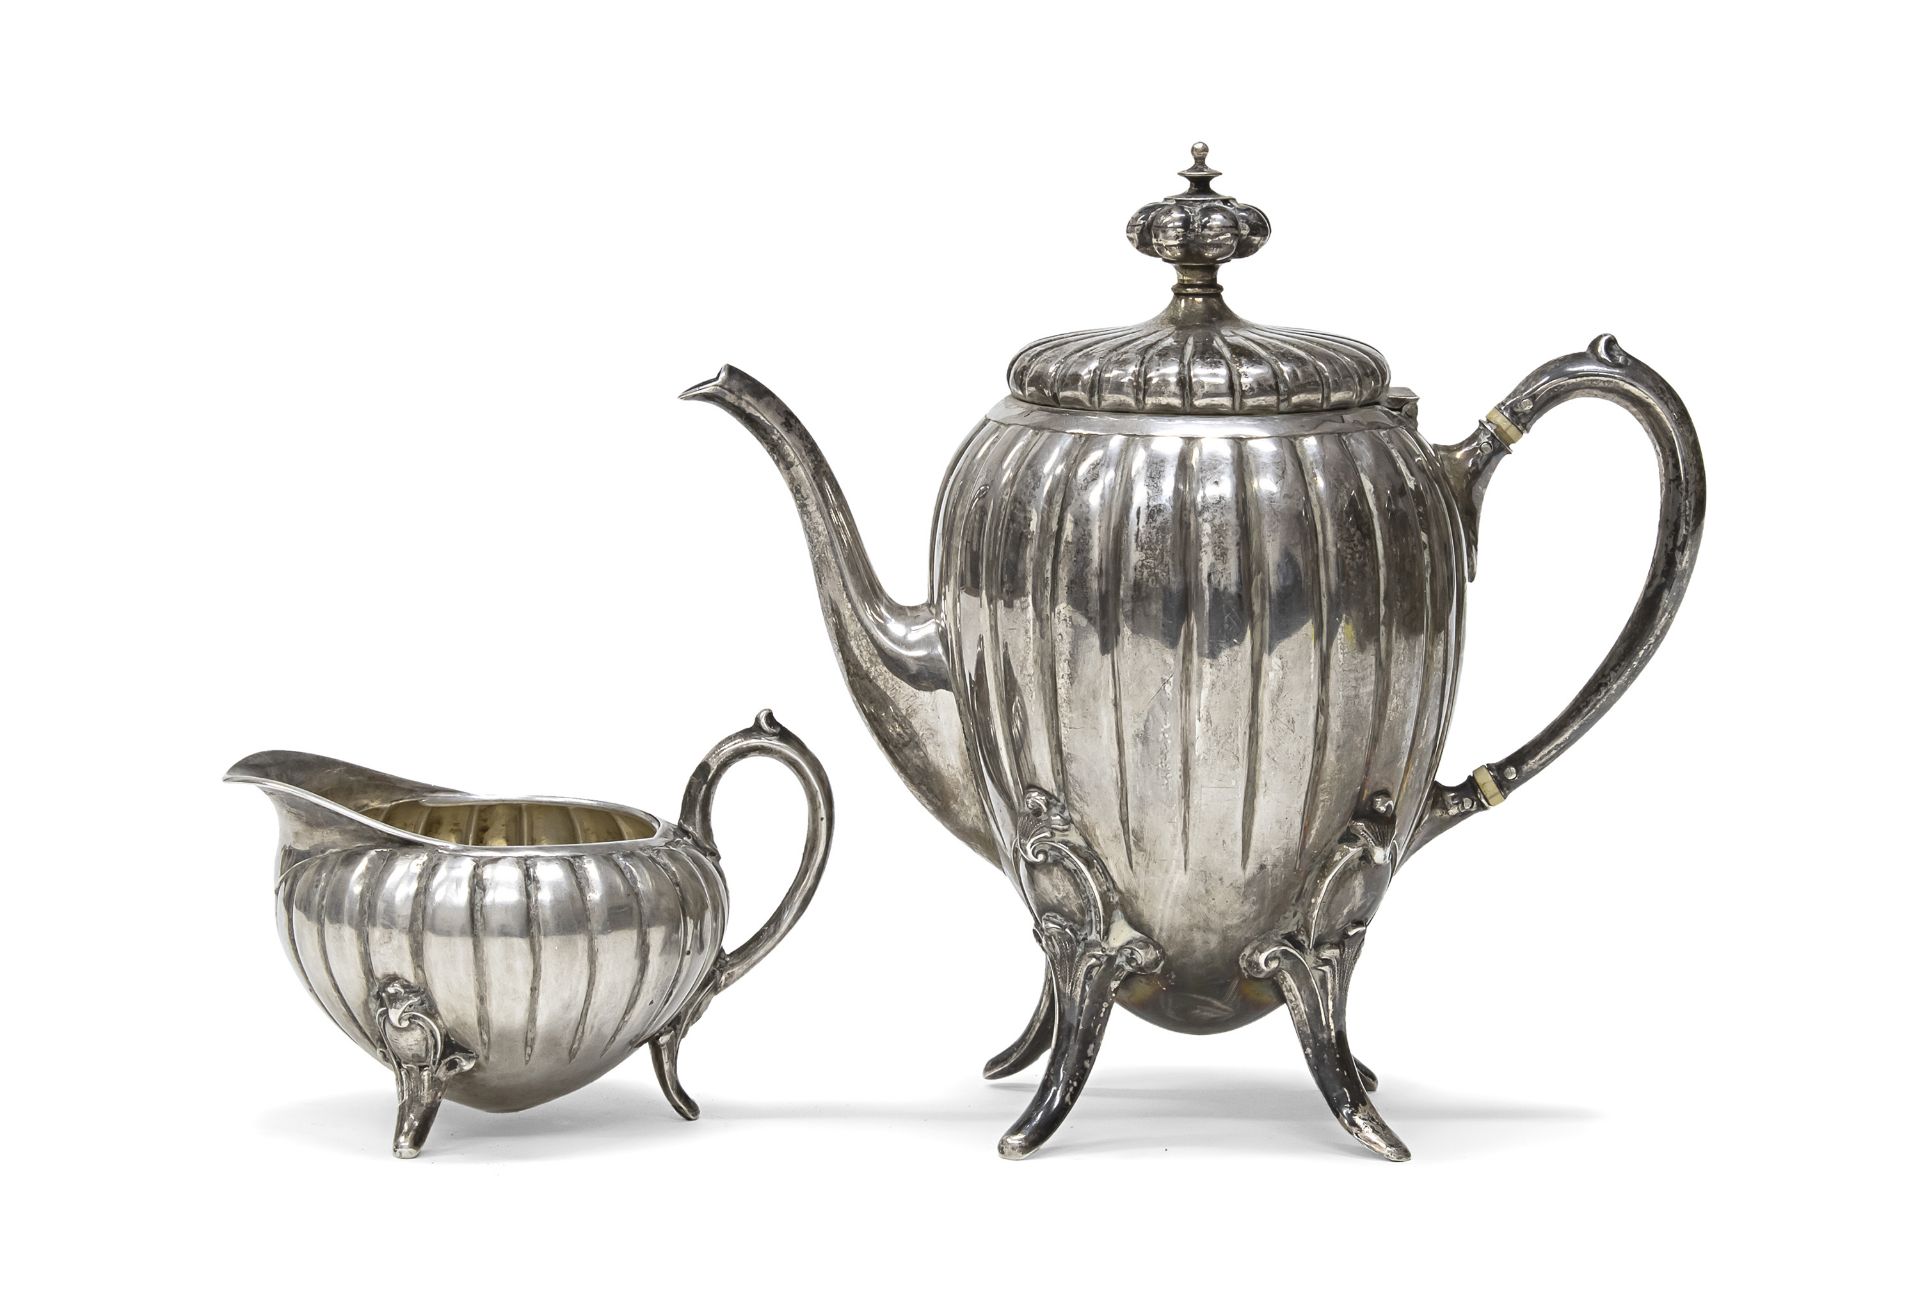 SILVER TEAPOT AND MILK JUG GERMAN EARLY 20TH CENTURY